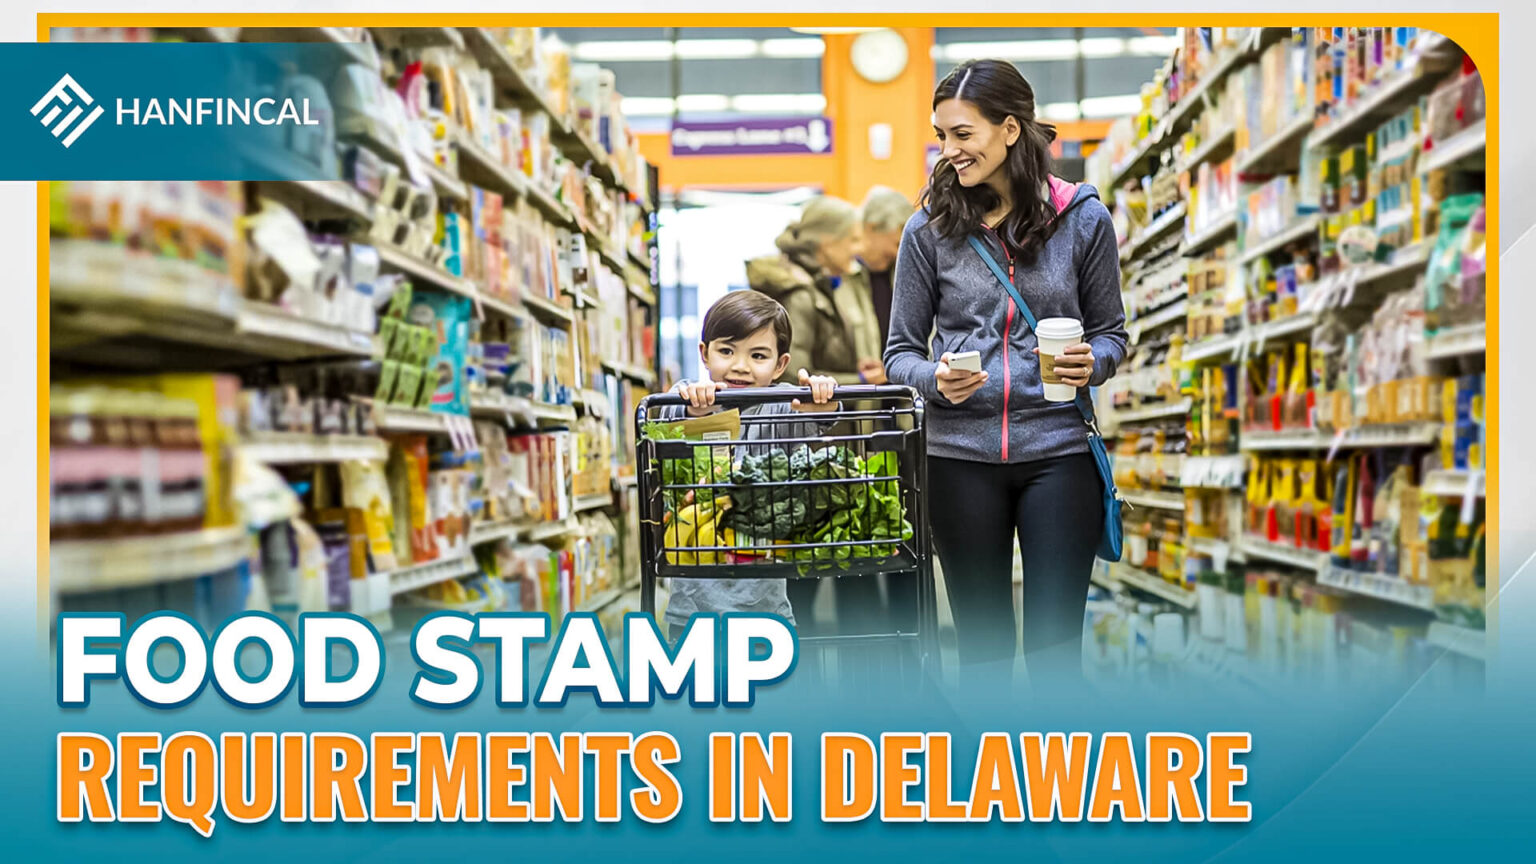 How to apply for Food Stamps in Delaware (02/2023)? Hanfincal